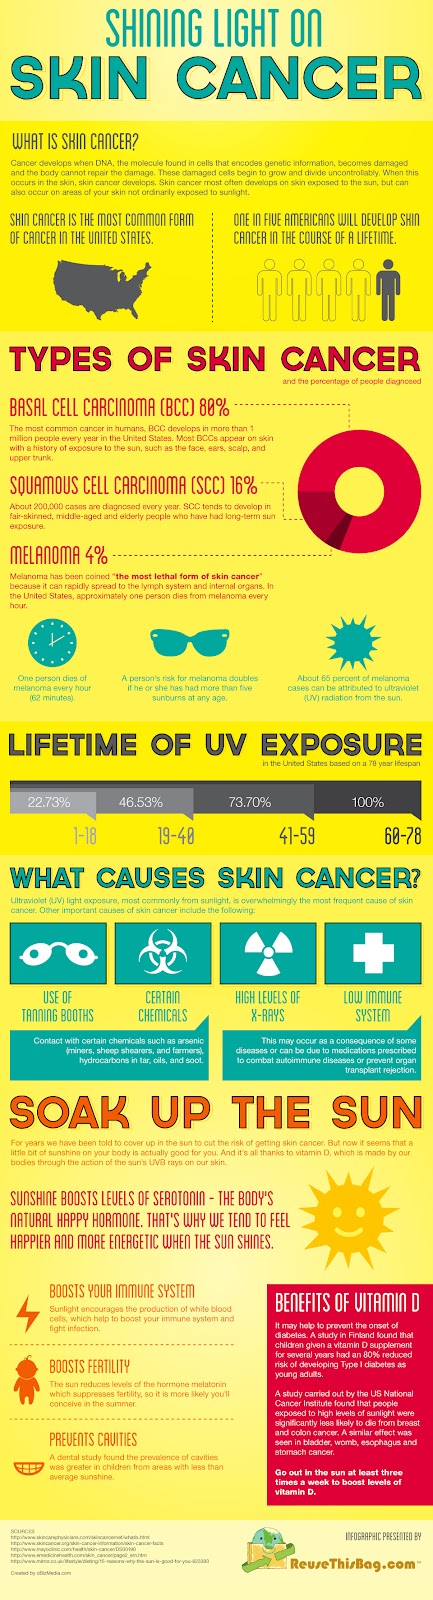 Shining Light on Skin Cancer + Sunscreen Coupons